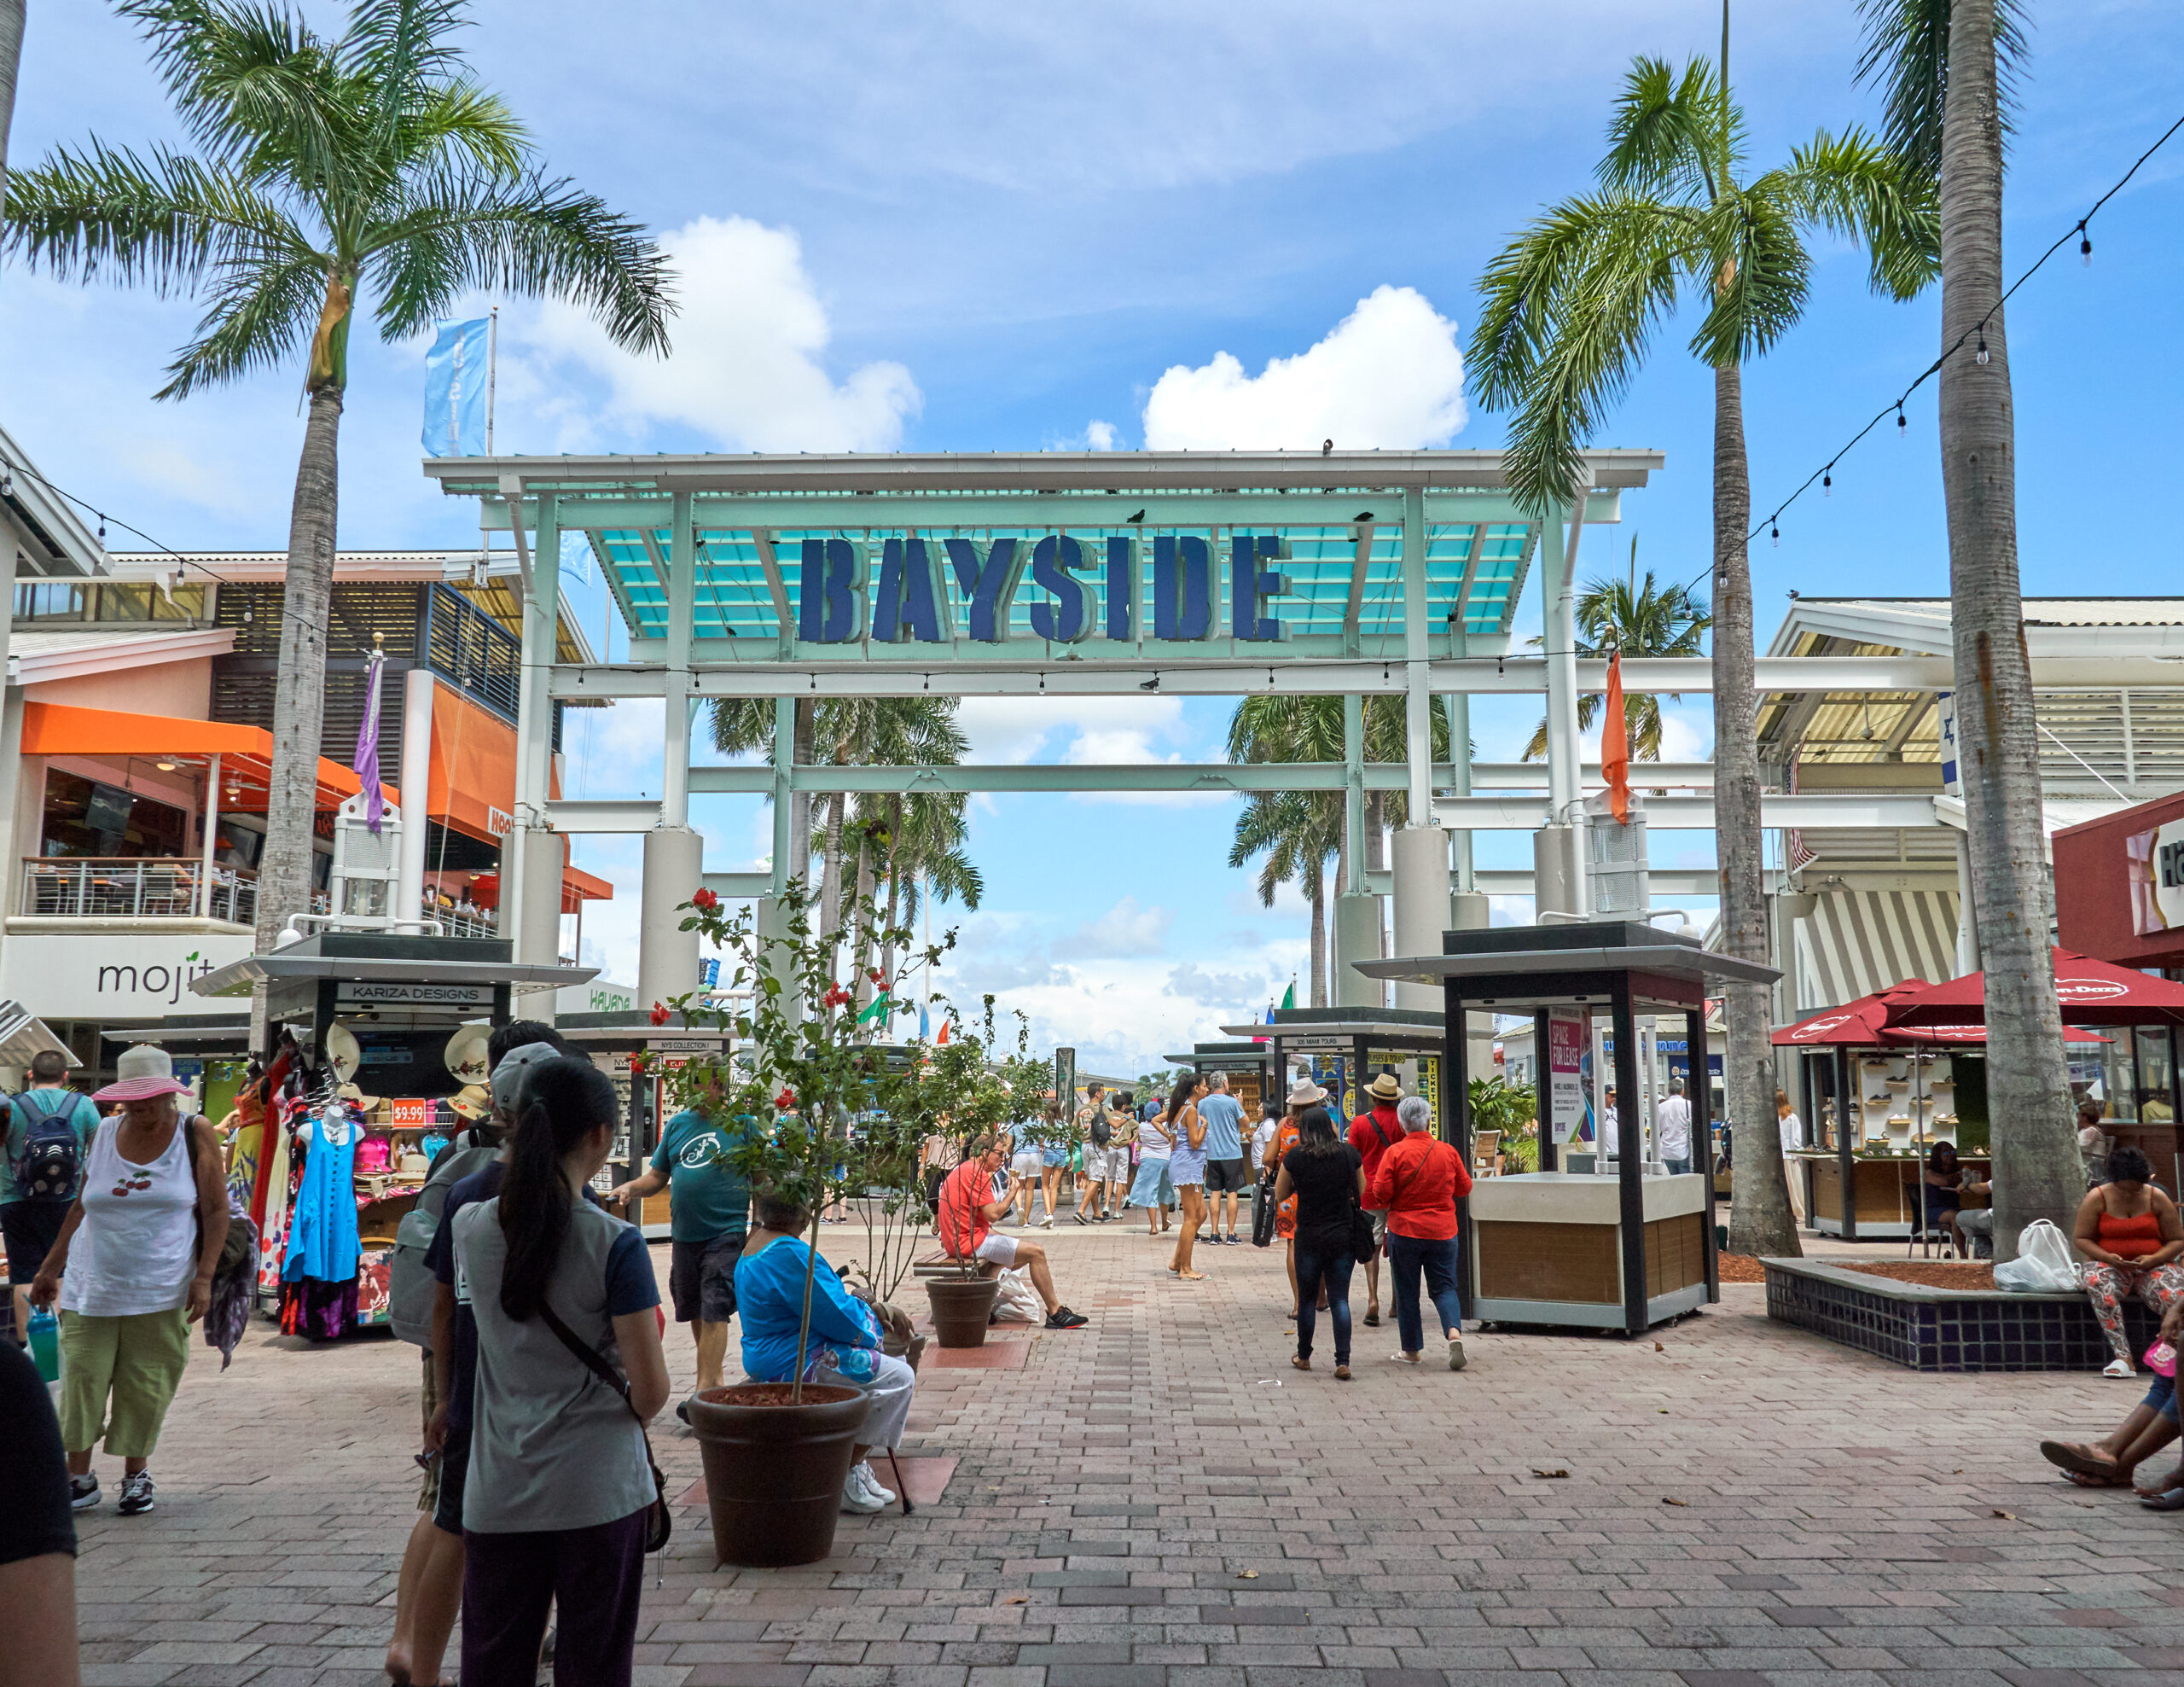 MIAMI, USA - AUGUST 22, 2018: Bayside Marketplace sign in Miami. Bayside Marketplace is two-story open air shopping center located in the Downtown Miami area